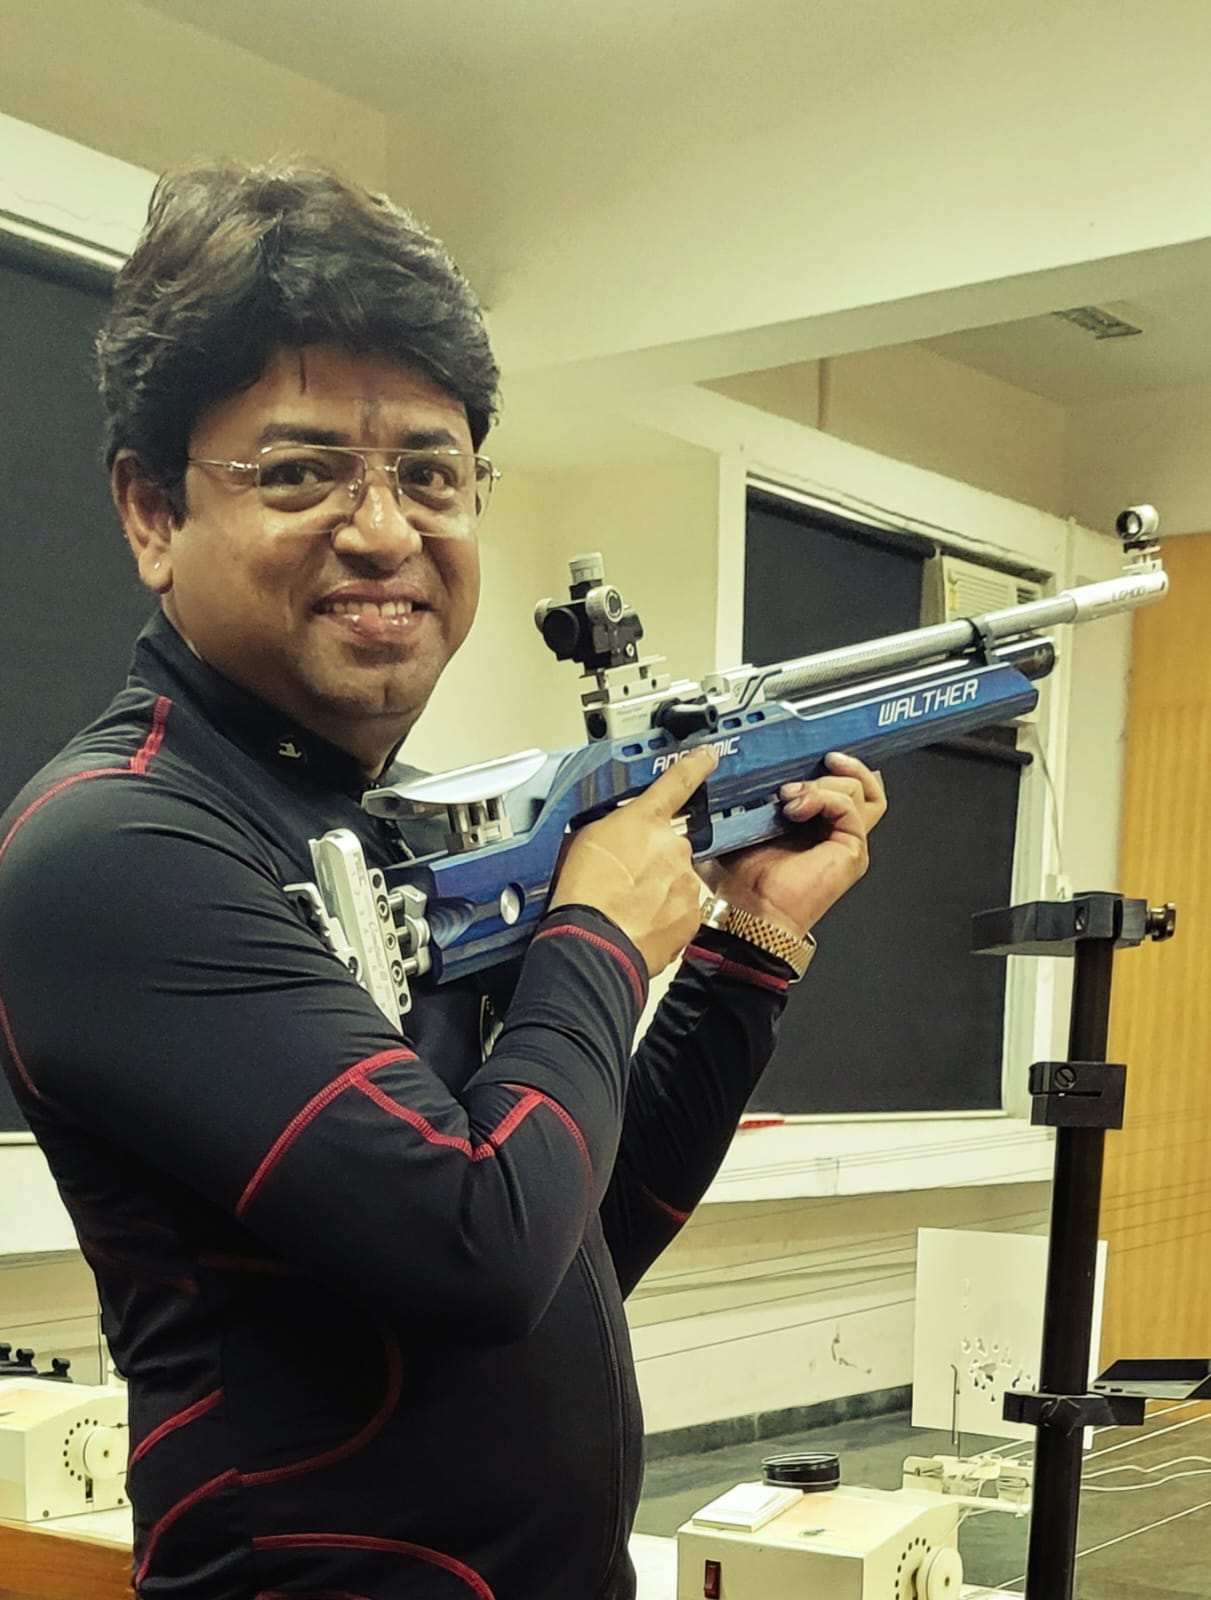 Abhijit Patil is scalling new heights in rifle shooting carrier.His outstanding performance in Gujarat competition has fetched him a ticket to National Level Competition. 10th West zone competition was organised between 18th August to 23rd August in The Ahmedabad Military and Rifle Training Association, Gujrat. Eminent rifle shooting players from Maharashtra, Goa, Gujarat, Madhya Pradesh, Diu and Daman participated in the competition. The National Rifle Association of India conducted the competition.